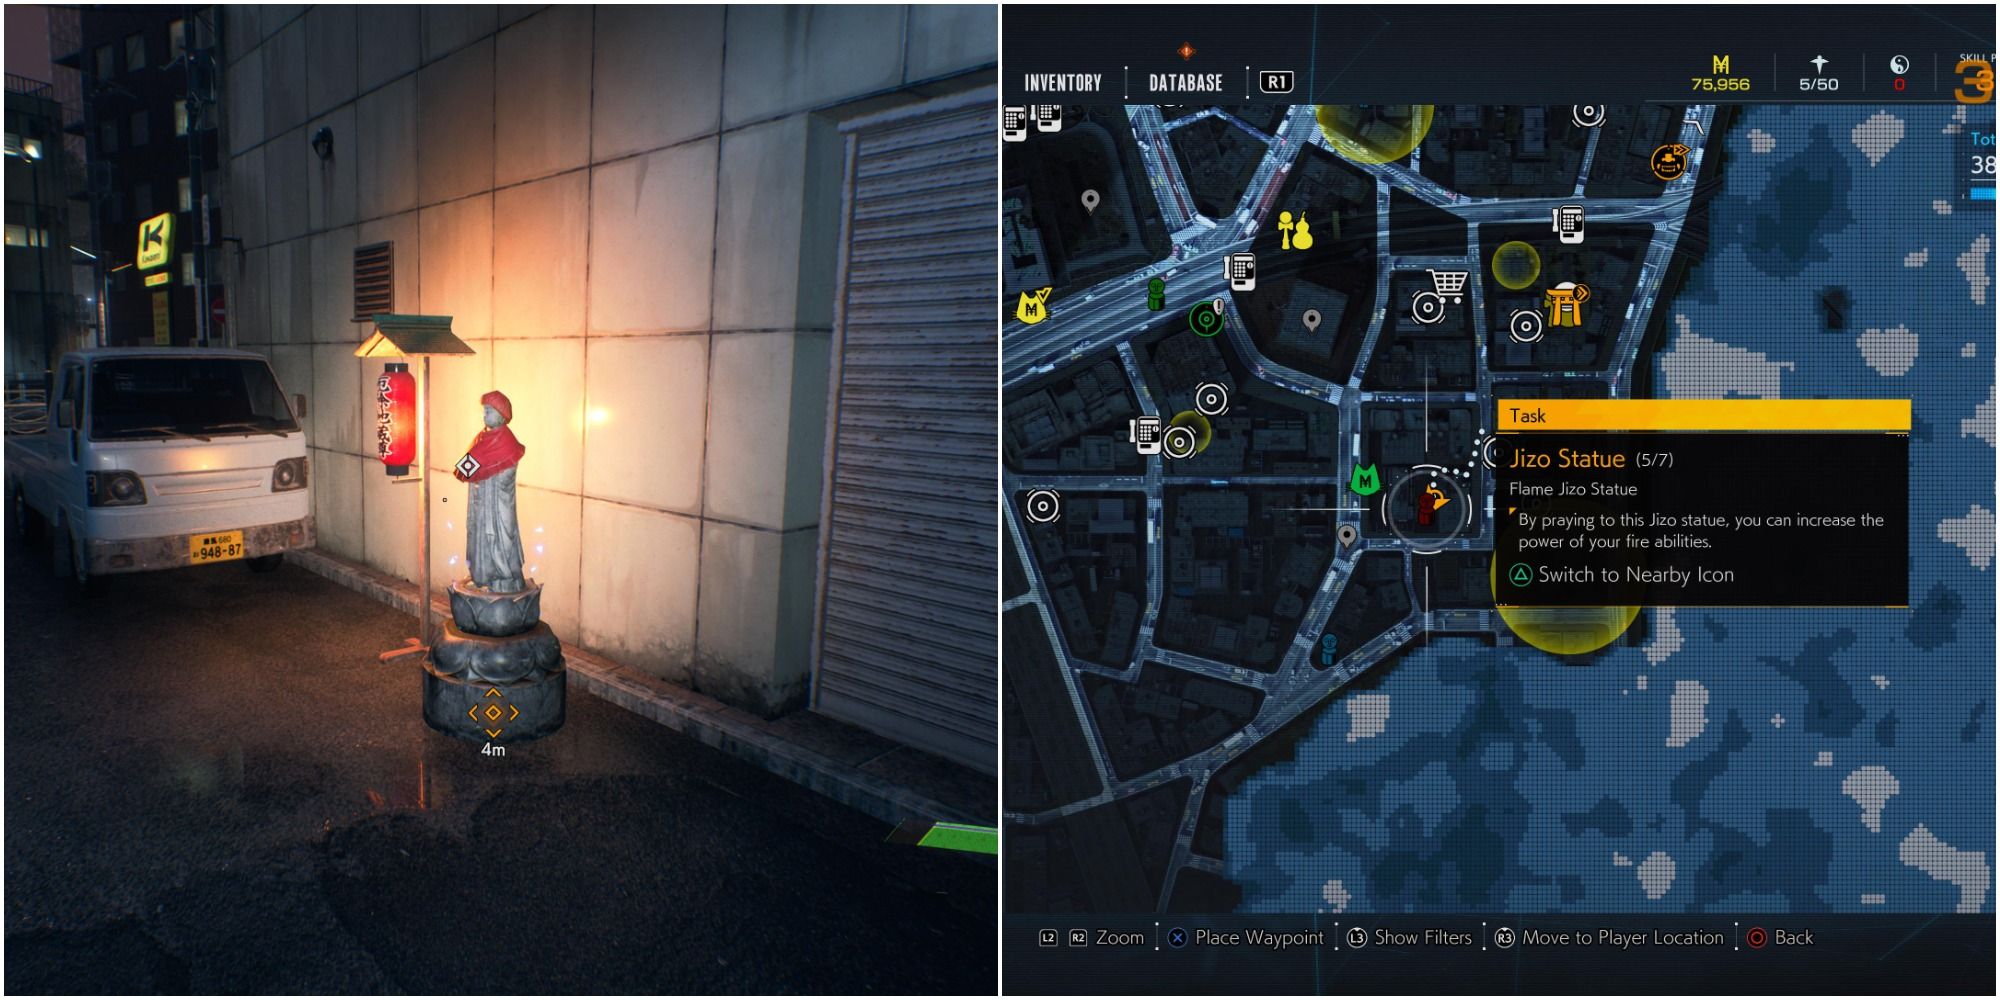 Ghostwire Tokyo split image of fire jizo statue and map location